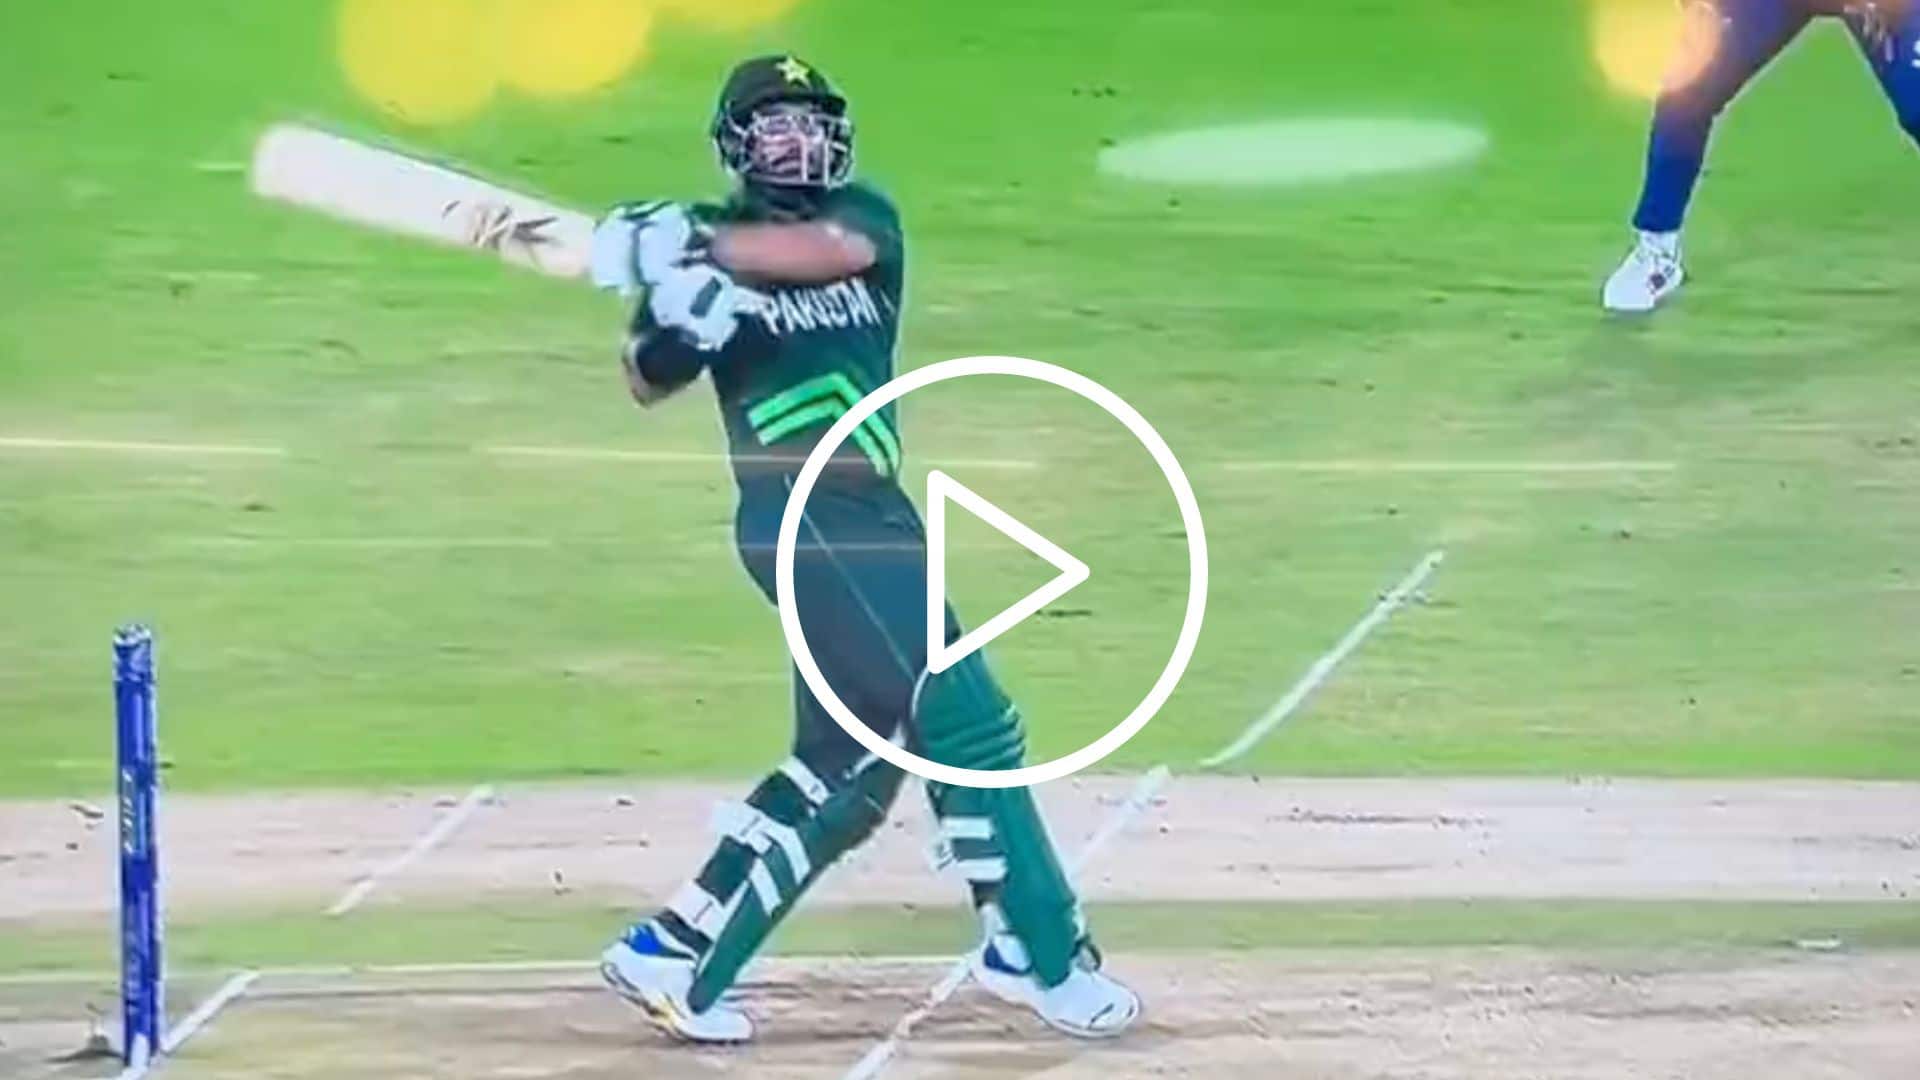 [Watch] Imam-ul-Haq Departs To A Deadly Bouncer By Dilshan Madushanka